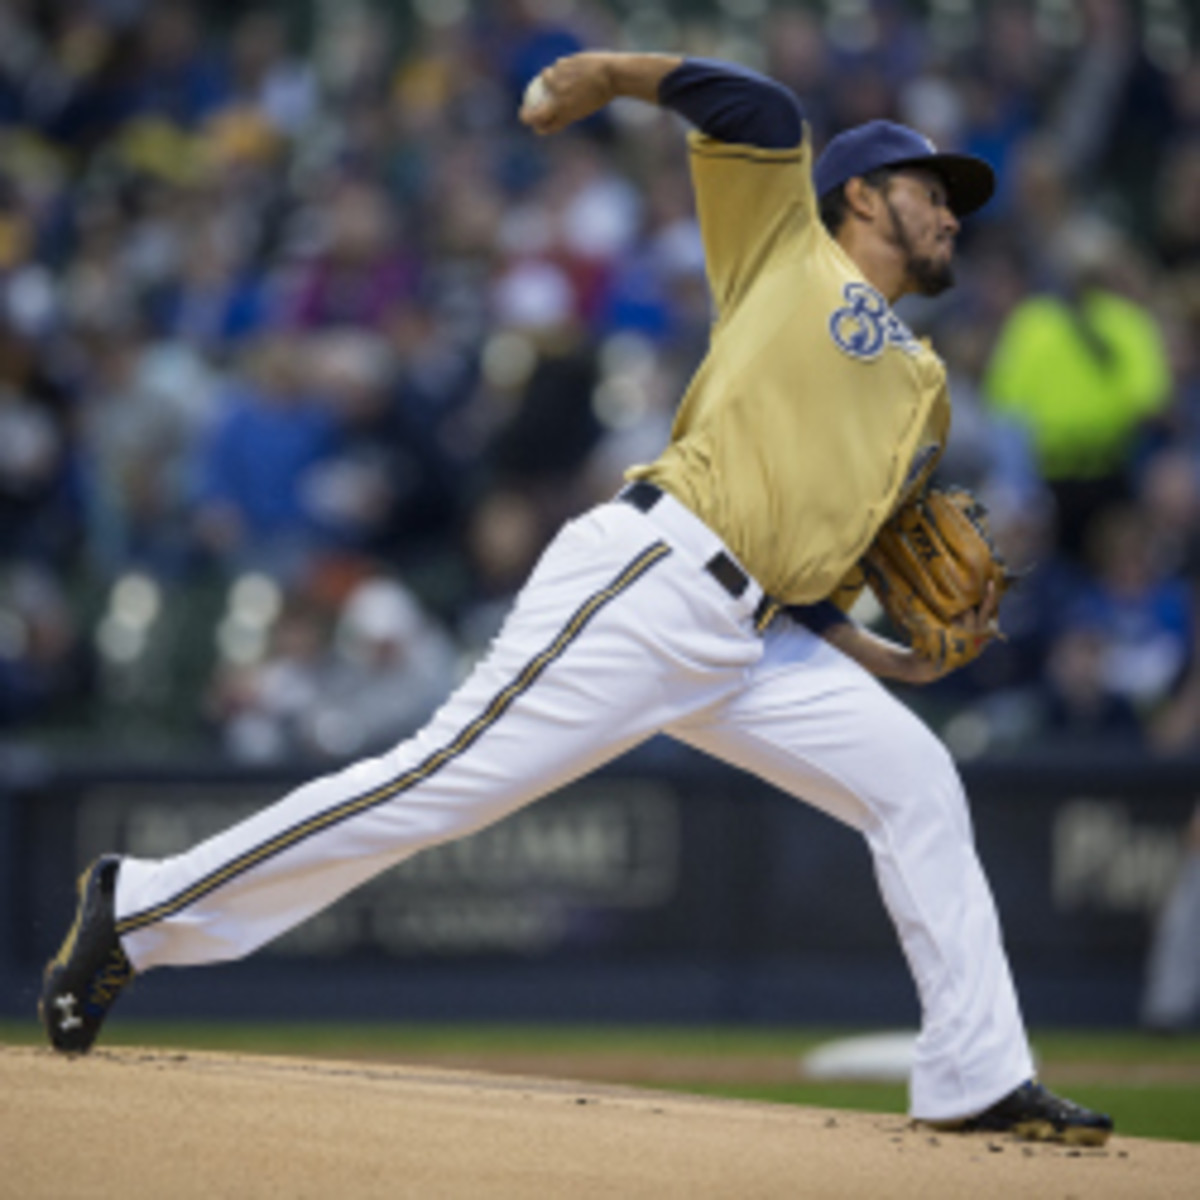 Brewers pitcher Yovani Gallardo was arrested for driving under the influence. He won't face jail time but was issued numerous fines. (Tom Lynn/Getty Images)